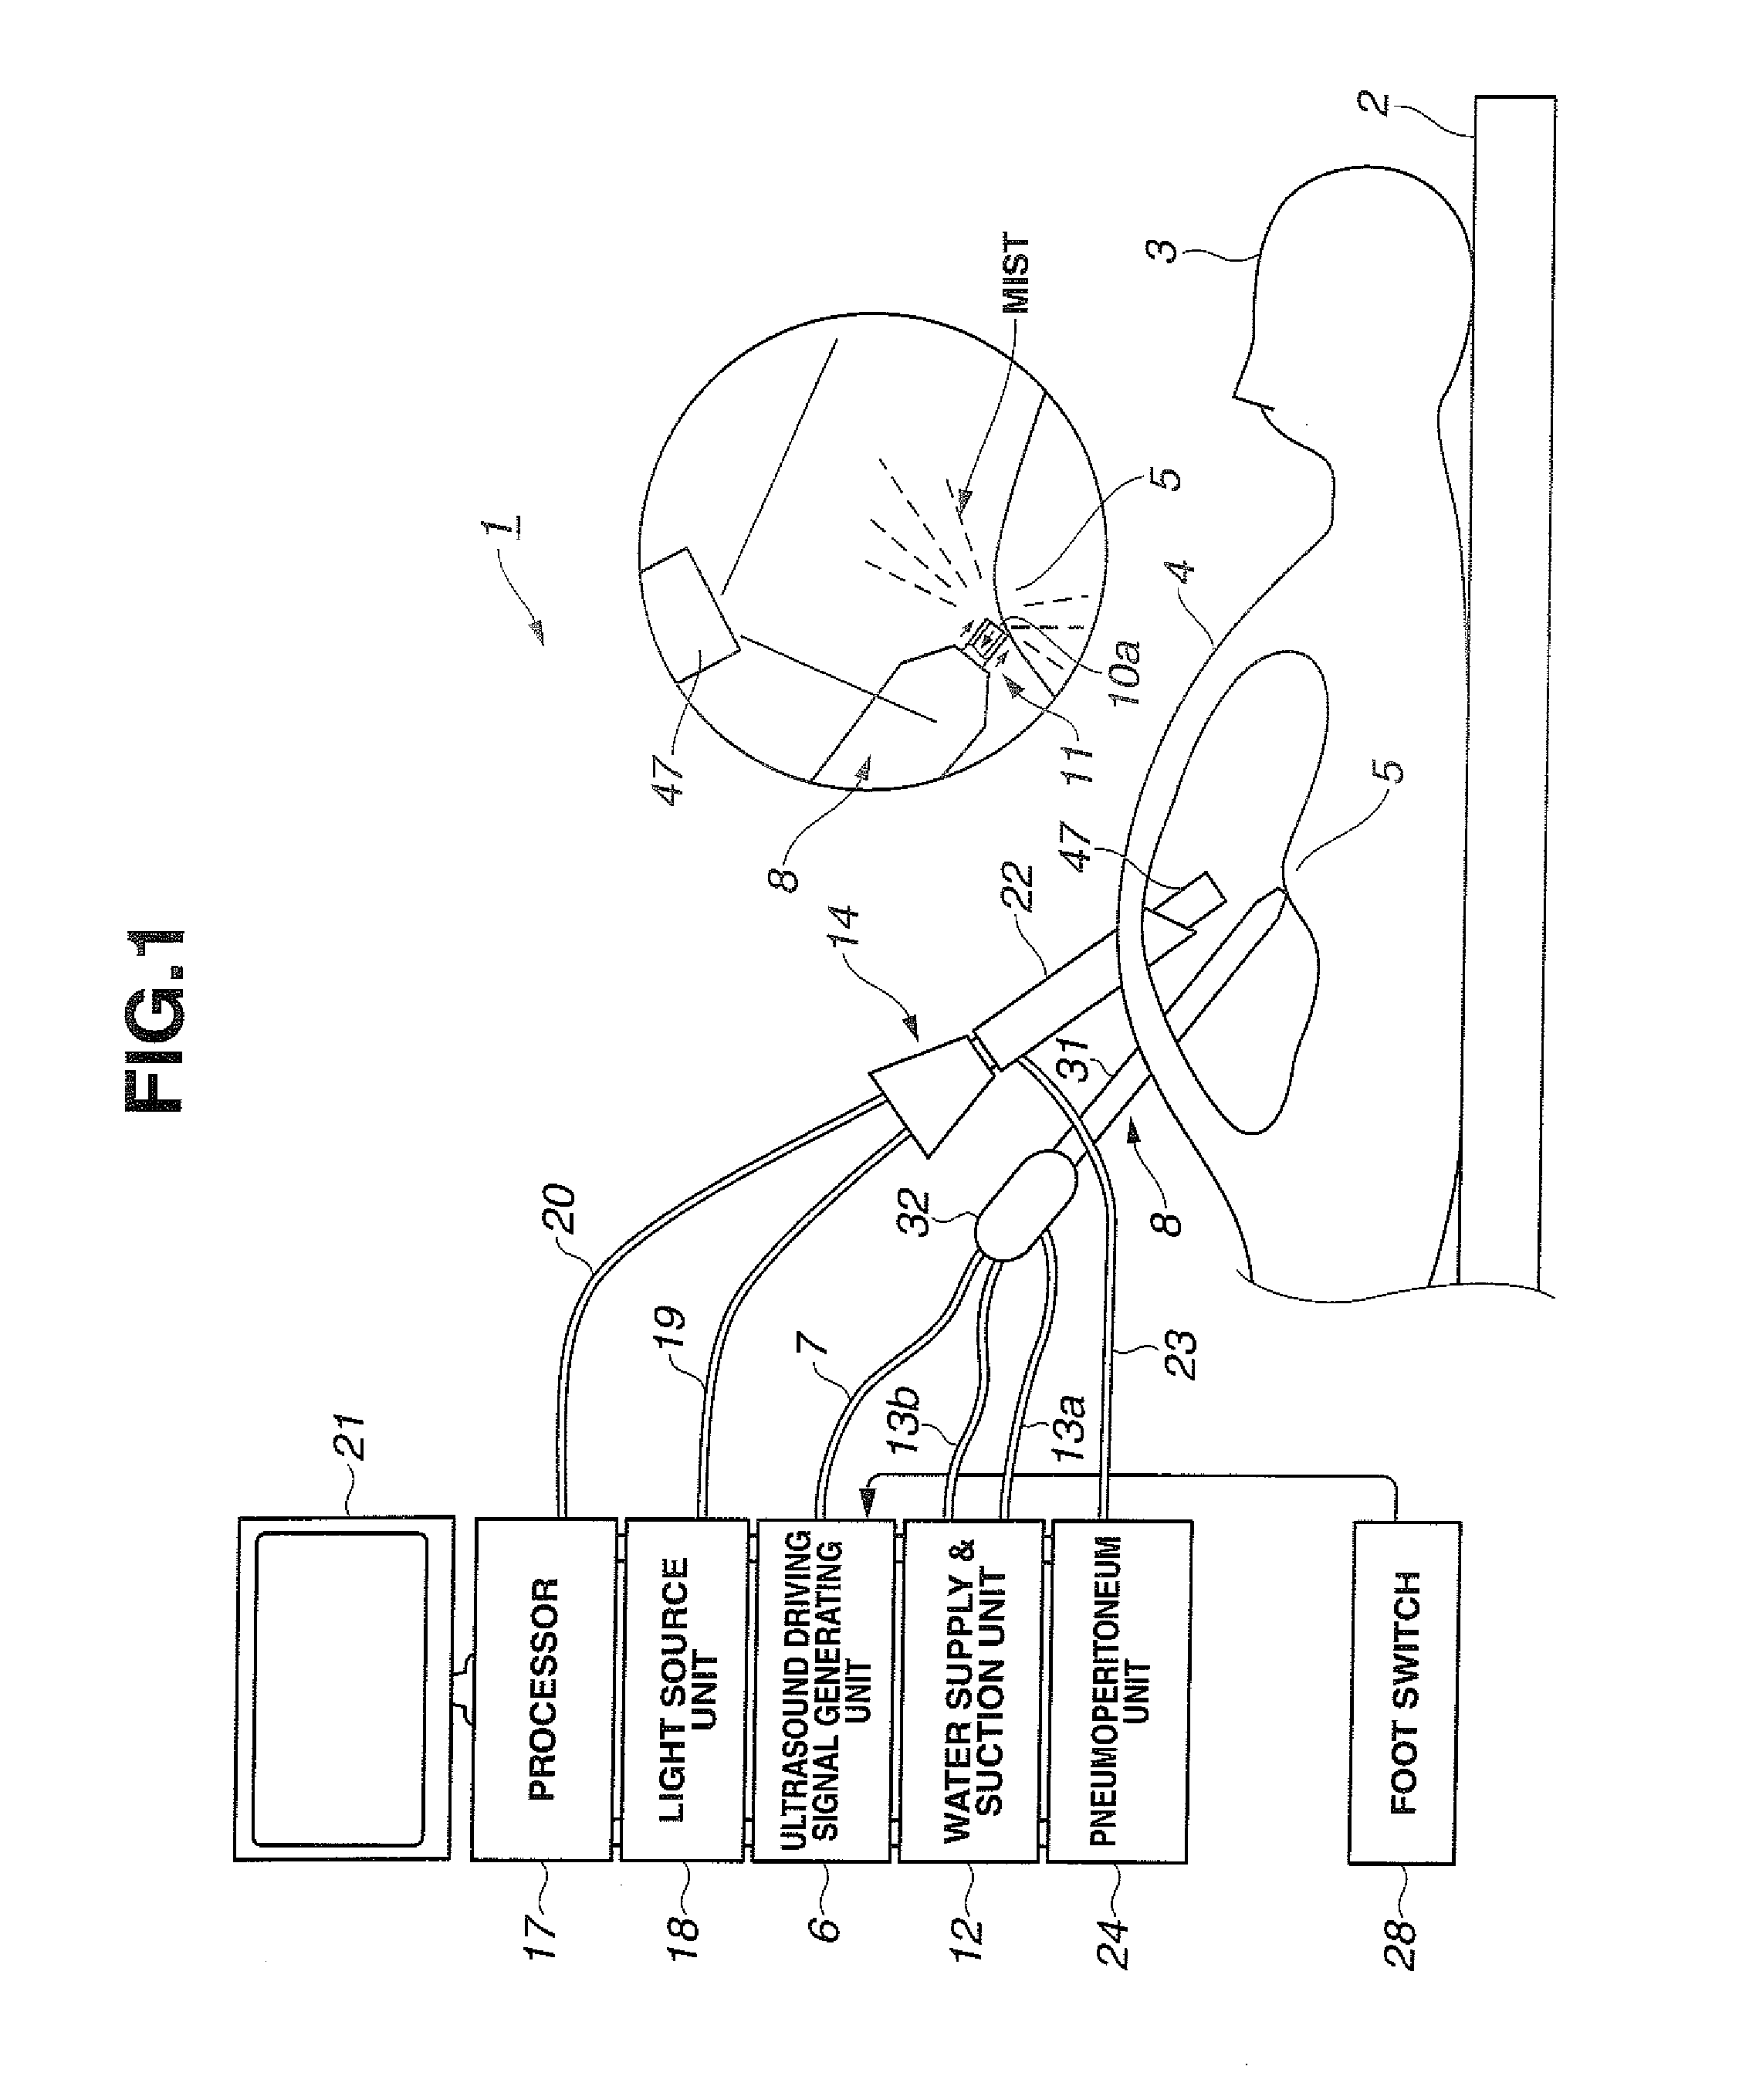 Ultrasound treatment system and method of actuating the ultrasound treatment system